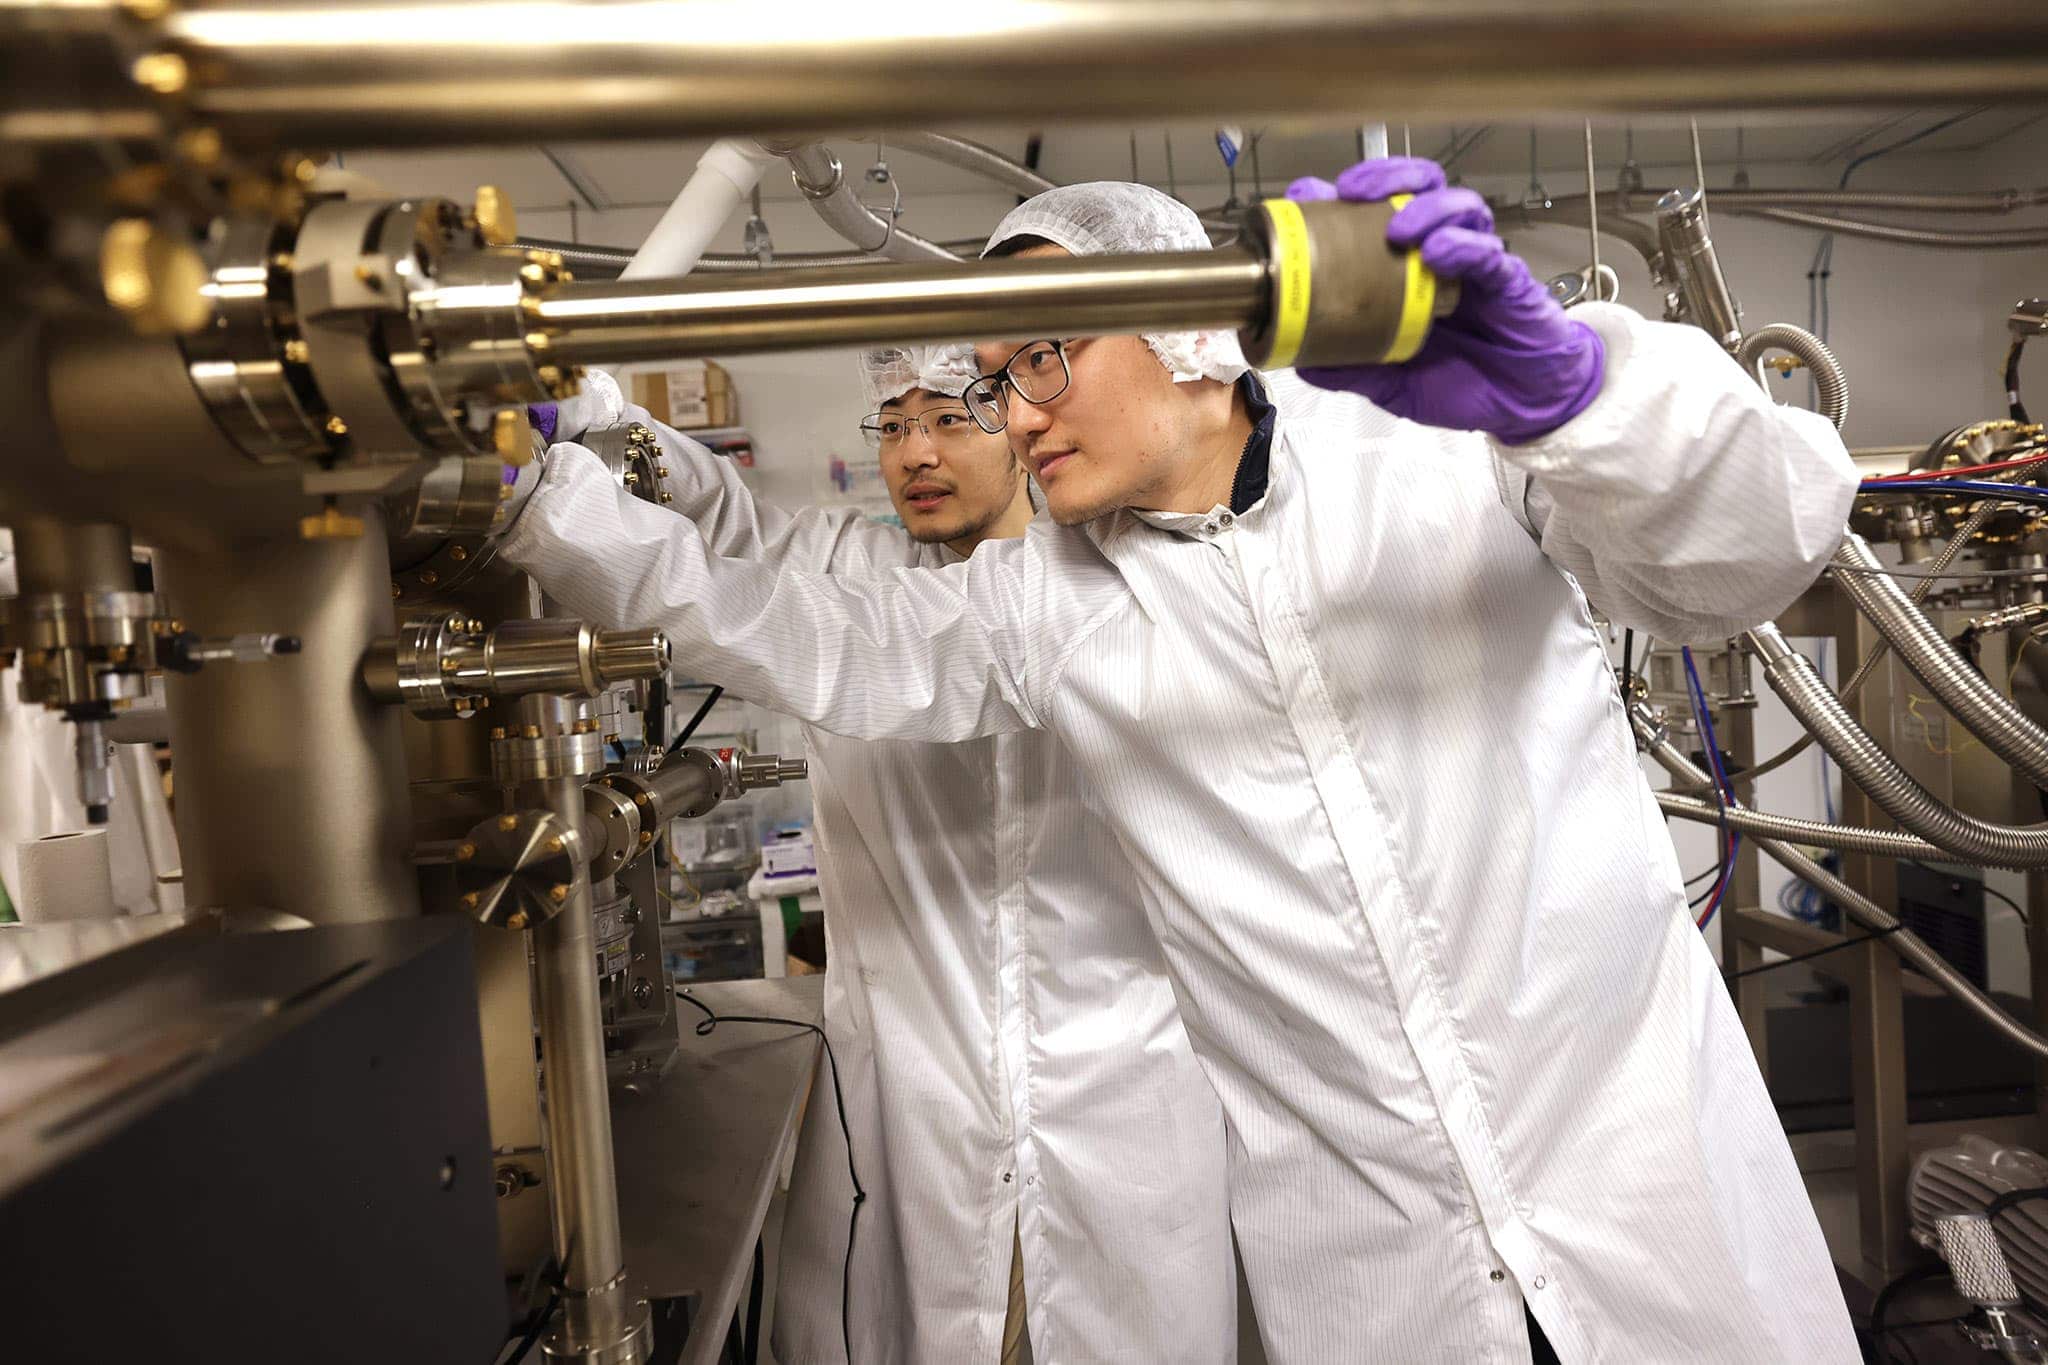 Two men in white clean room lab gear examine a large, shiny piece of machinery